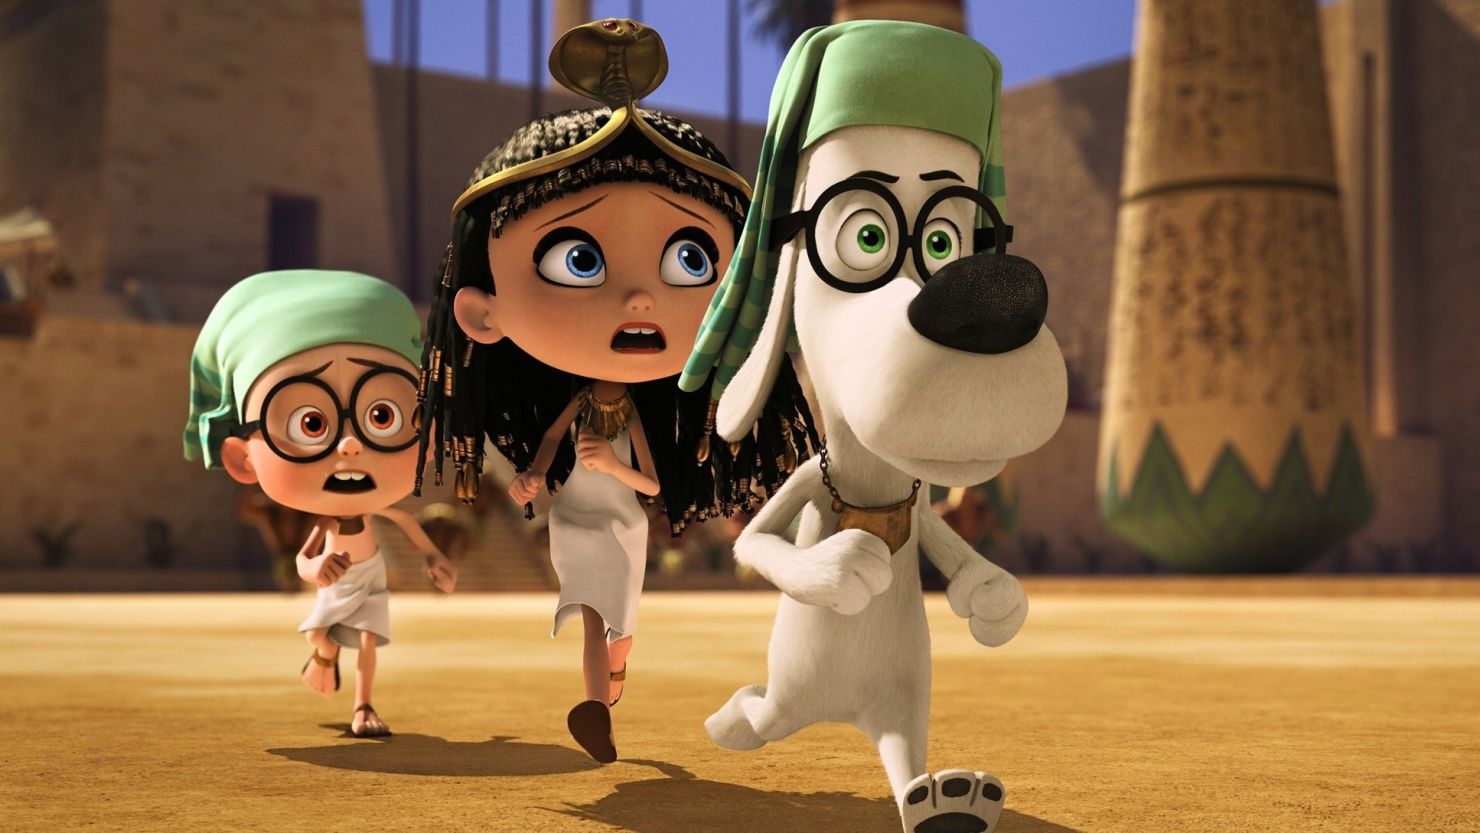 "Mr. Peabody & Sherman" features Ty Burrell as the voice of "the world's smartest animated dog."